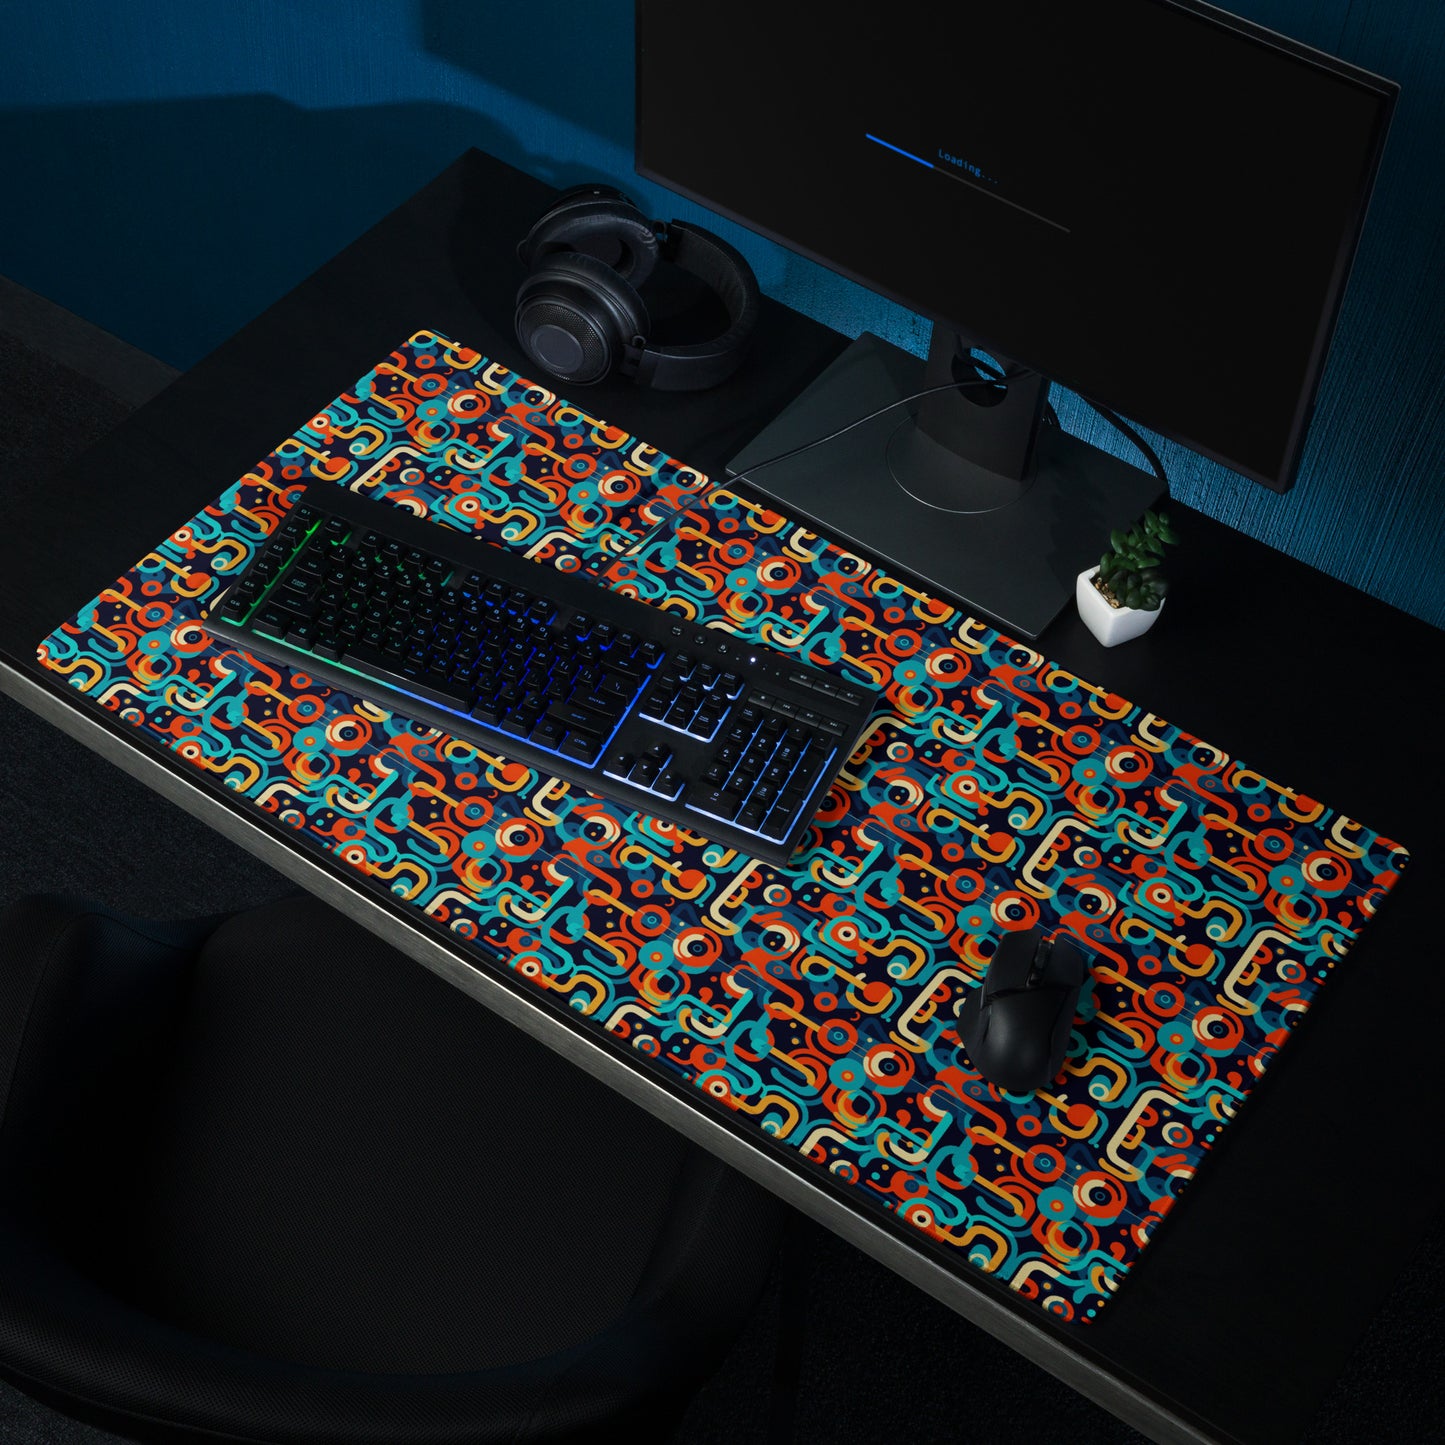 A 36" x 18" gaming desk pad with blue, orange, and beige lines on a black background. It sits on a black desk with a keyboard, monitor, and mouse.